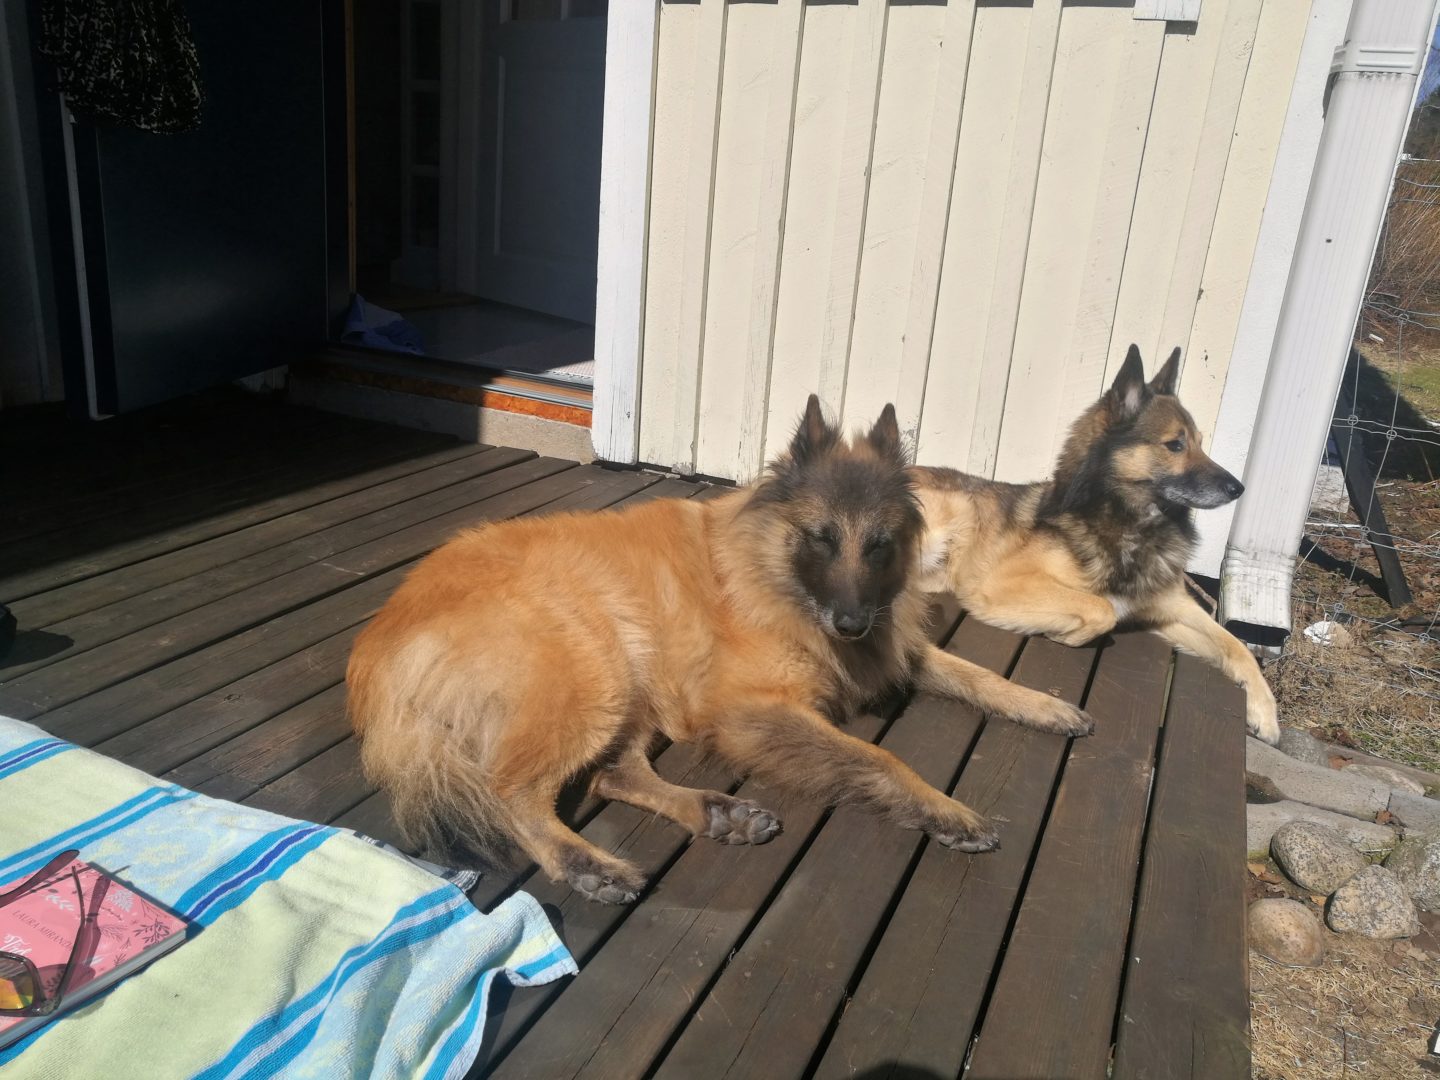 Finally warm Annimarian Two dogs in the sun on a terrace, a belgian shepherd dog and a belgian-mix